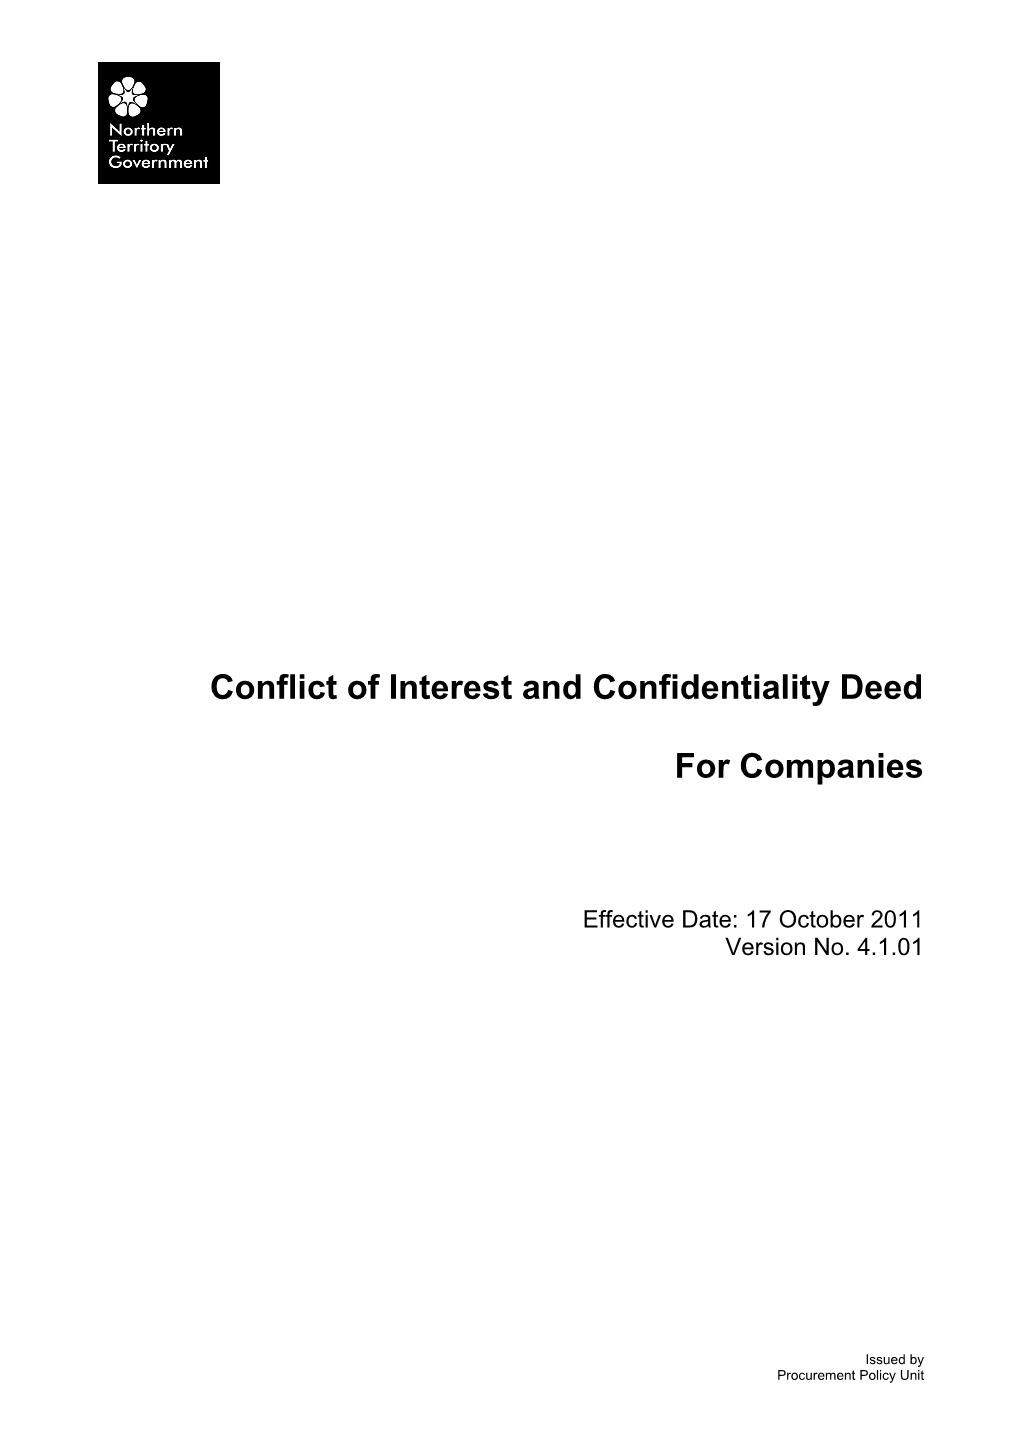 Conflict of Interest and Confidentiality Deed - for Companies - V 4.1.01 (17 October 2011)